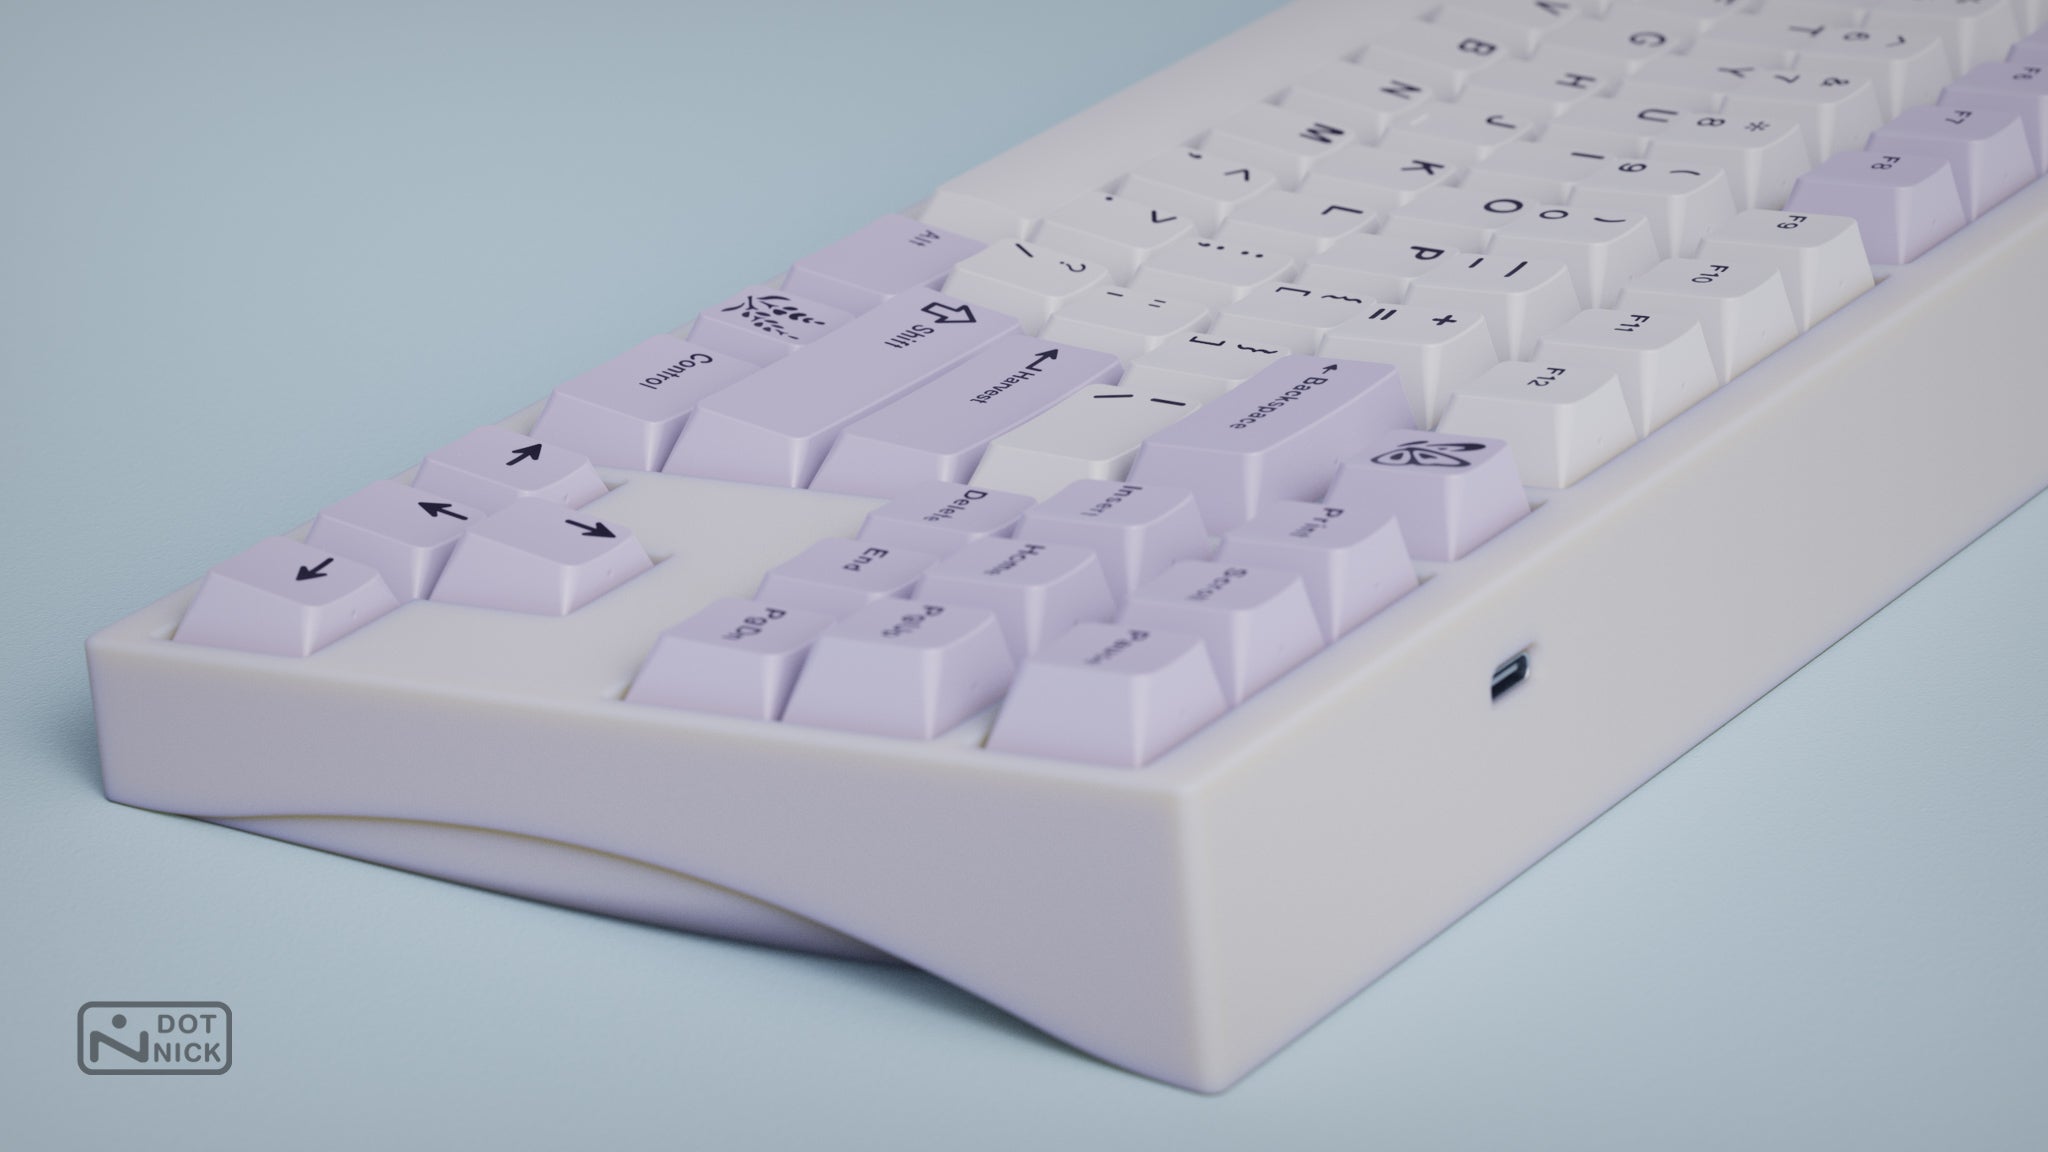 GMK CYL Lavender Keycaps-Space Cables-gmk keycaps-gmk keyboard-custom keycaps-keycaps-keyboard keycaps